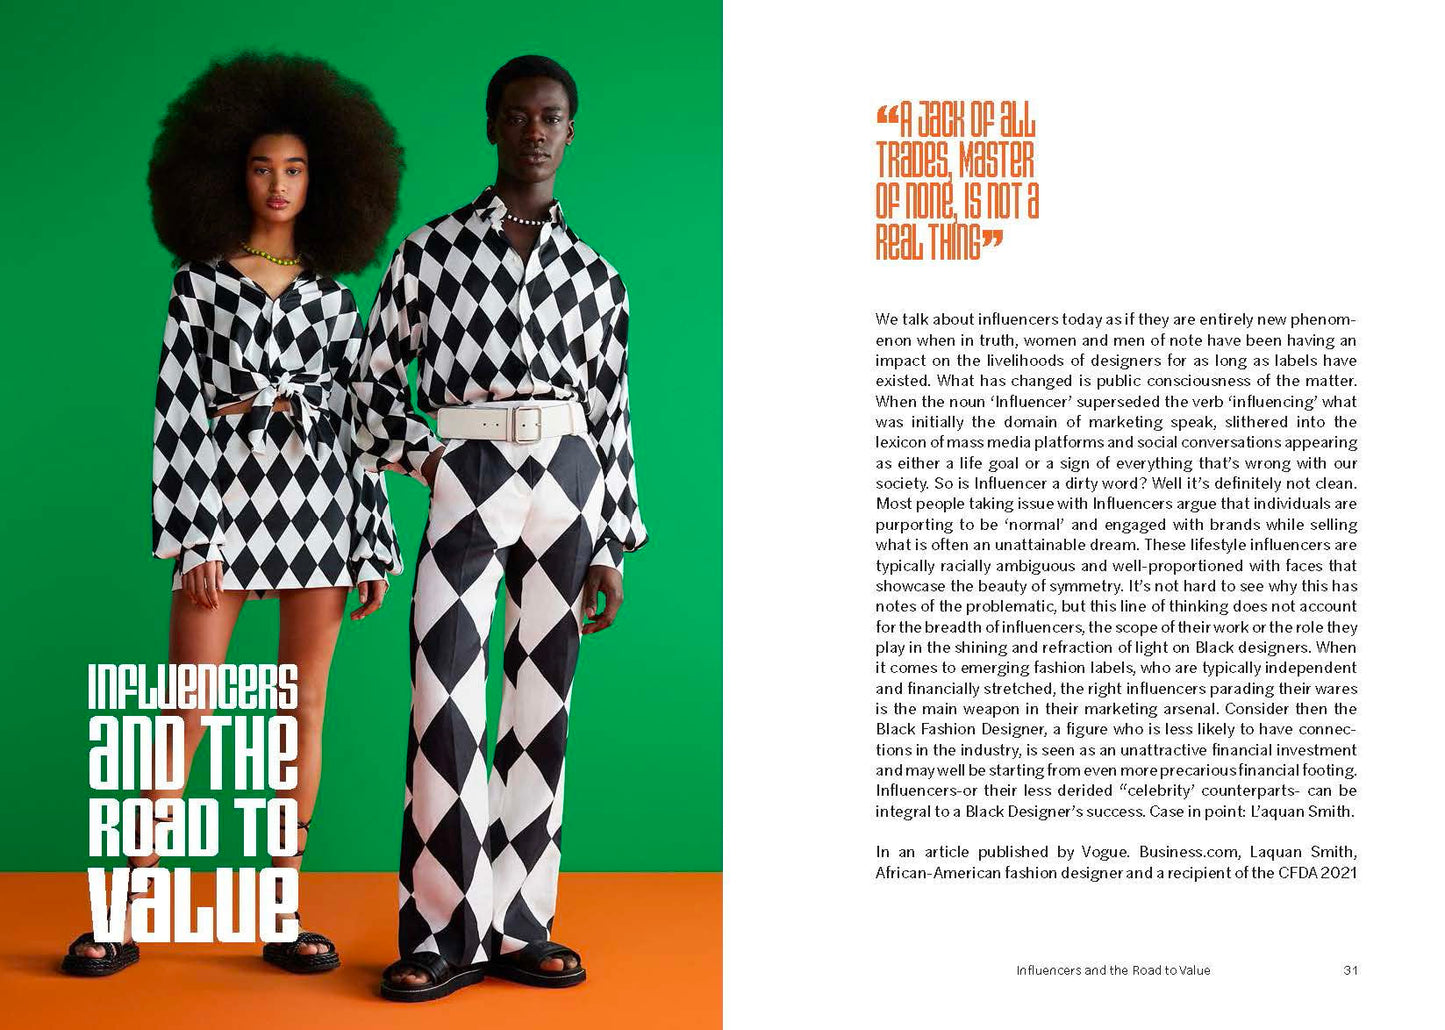 Now You See Me // An Introduction to 100 Years of Black Design